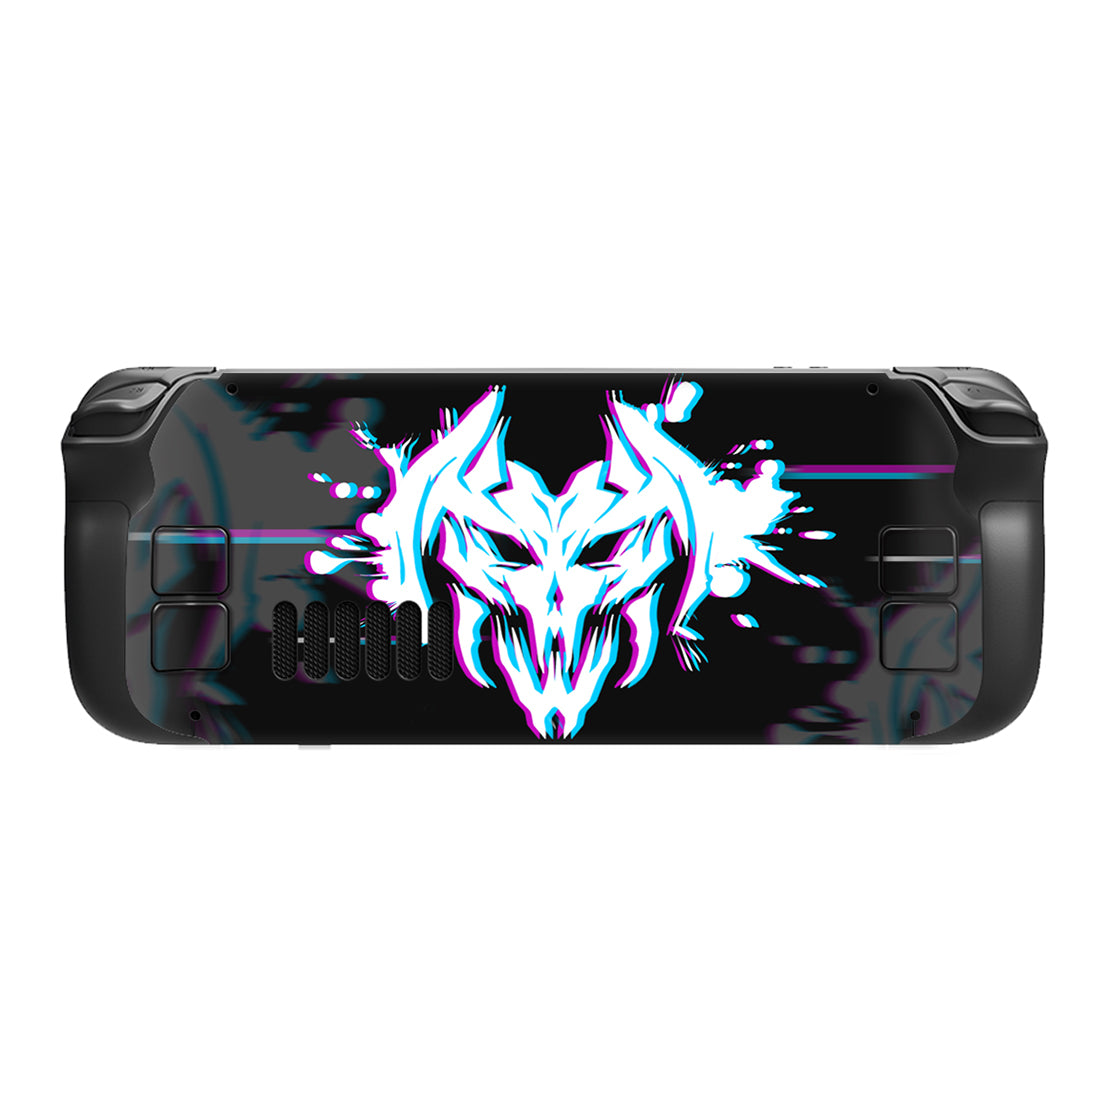 PlayVital Full Set Protective Skin Decal for Steam Deck, Custom Stickers Vinyl Cover for Steam Deck Handheld Gaming PC - Glitch Demons - SDTM023 playvital